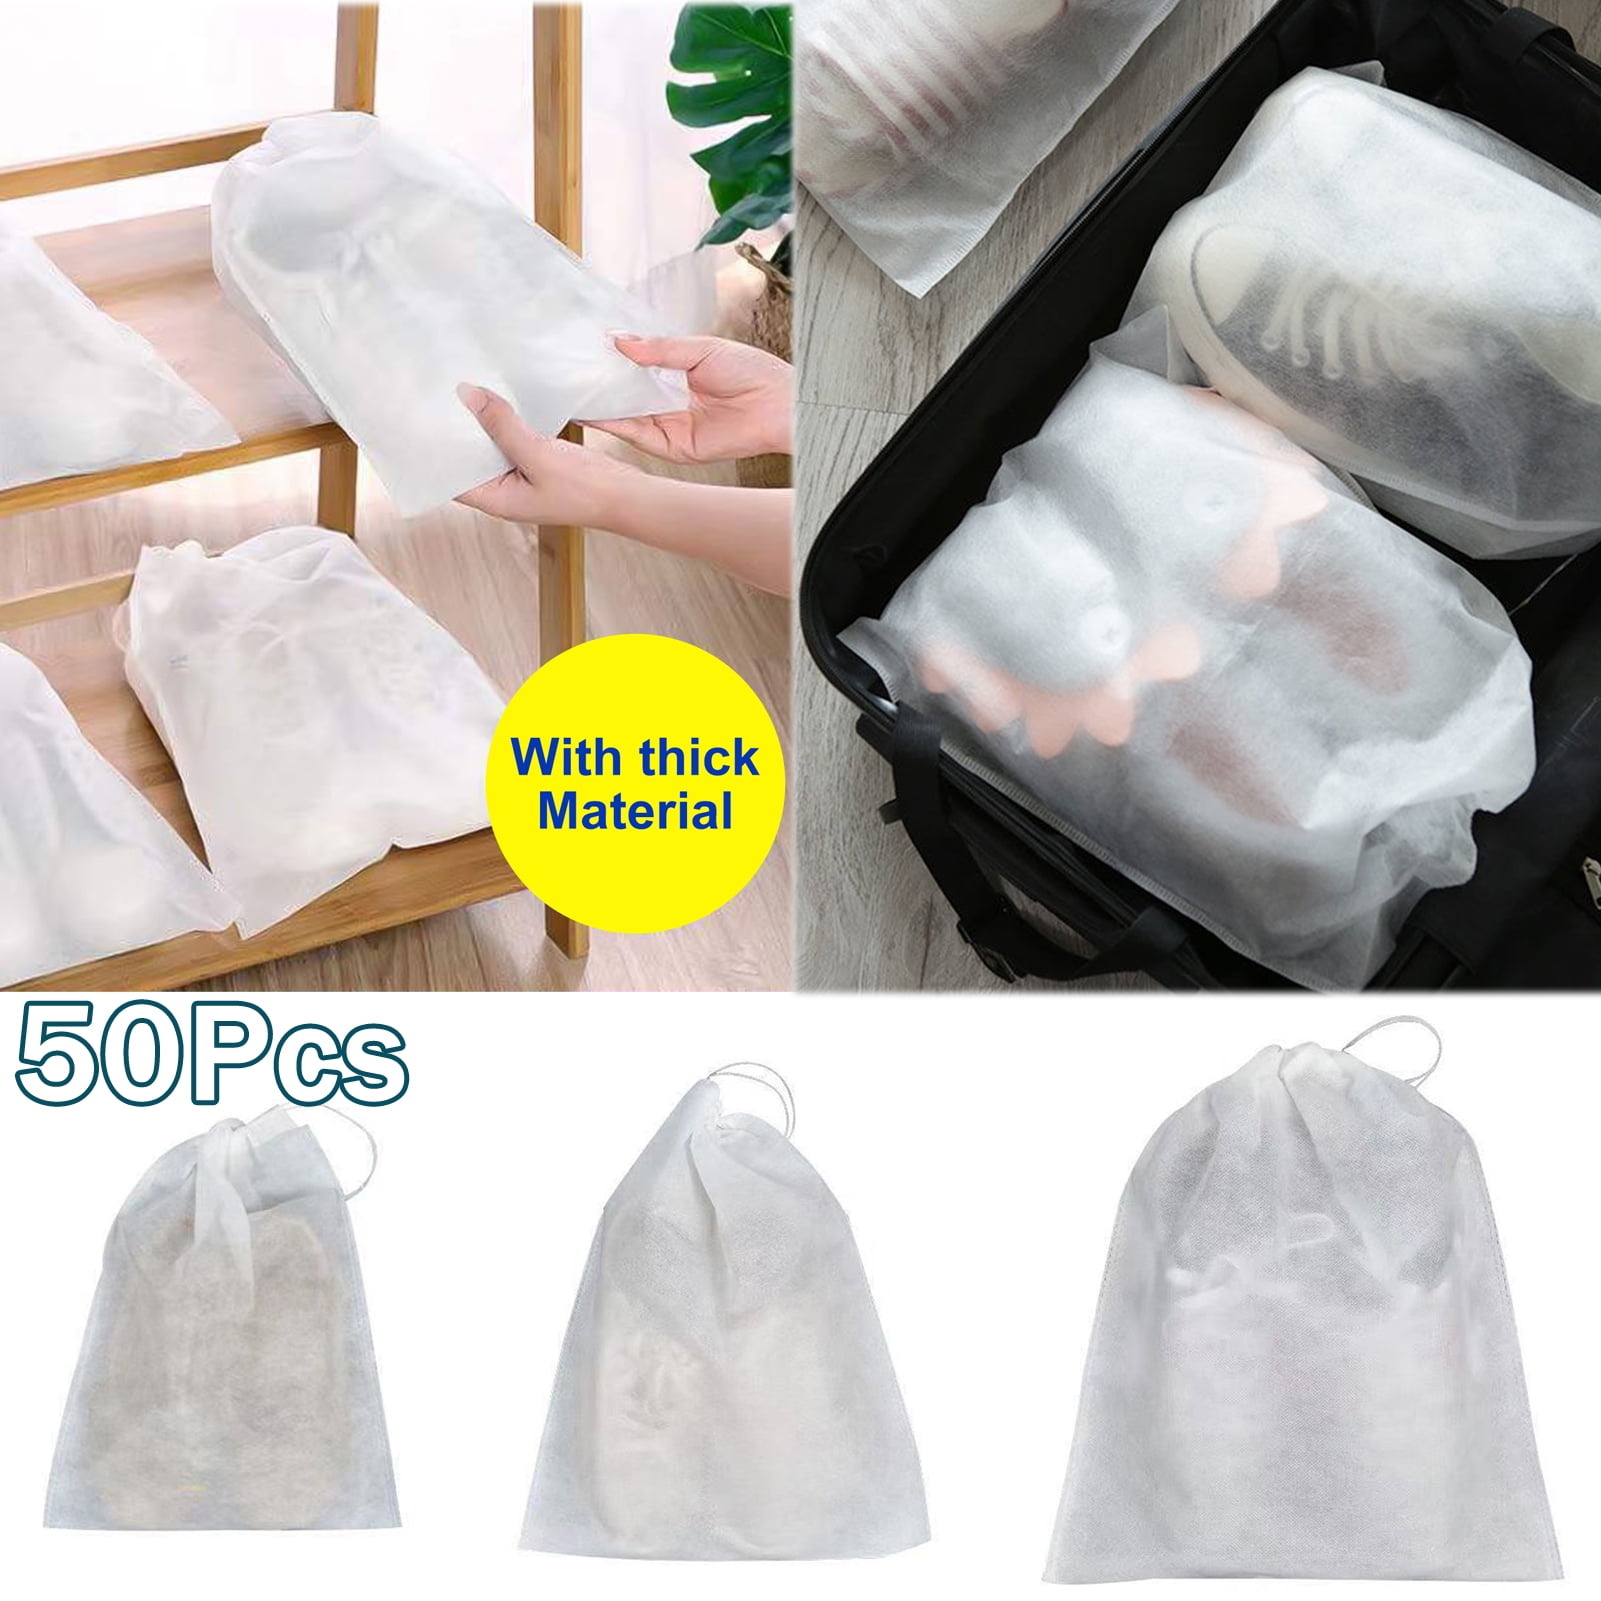 3/5xPortable Waterproof Travel Storage Organizer Pouch Plastic Shoes Packing Bag 